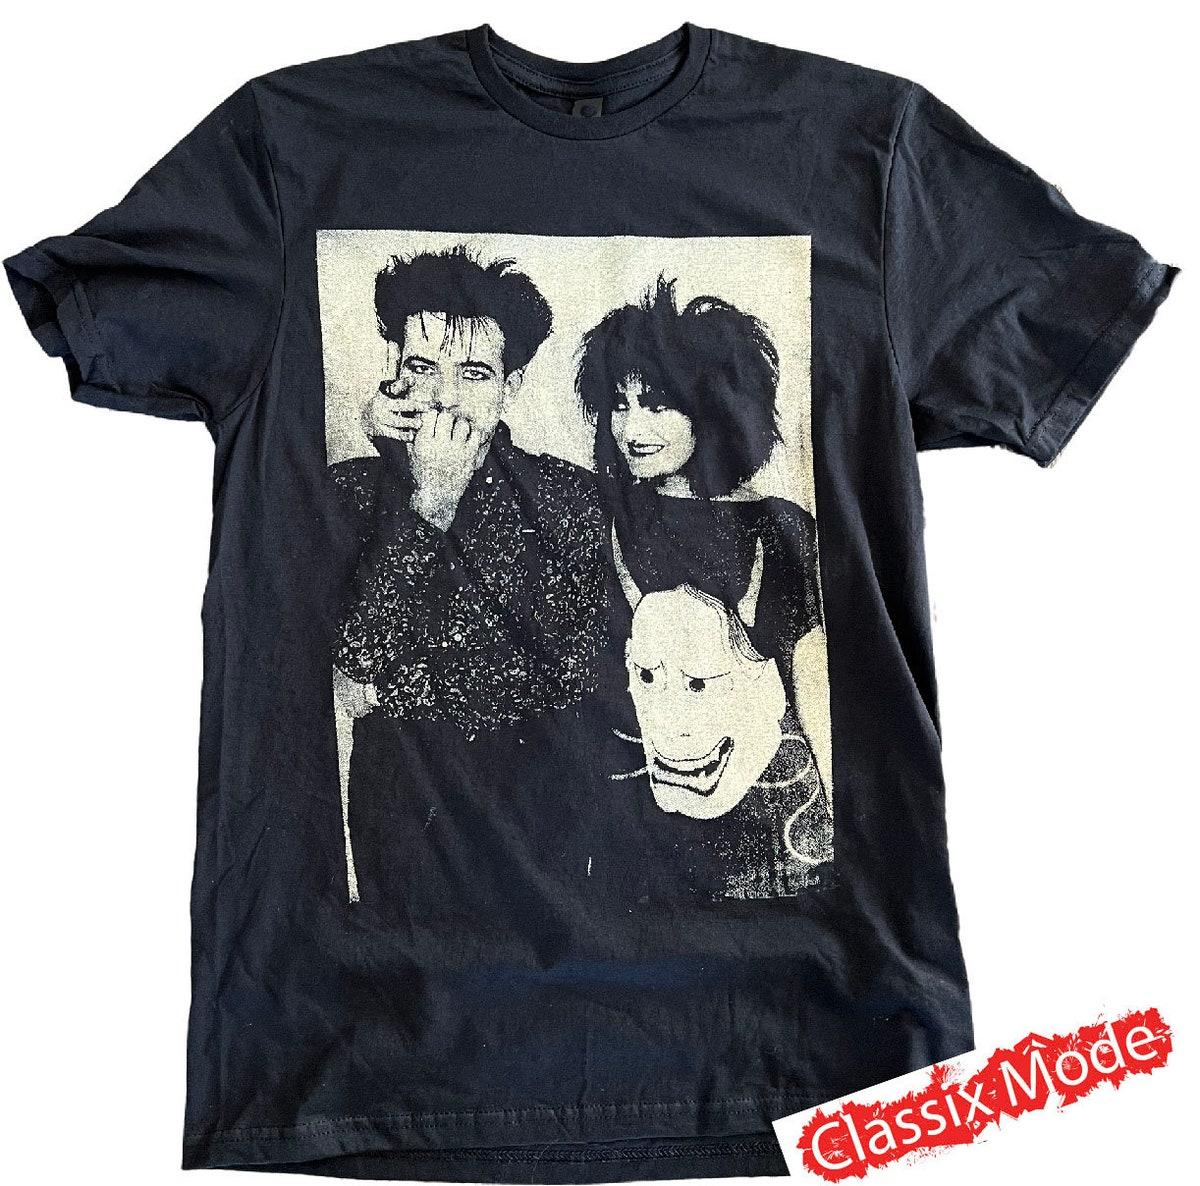 Post-punk Band Bauhaus Group Photo T-shirt Best Gifts For Fans